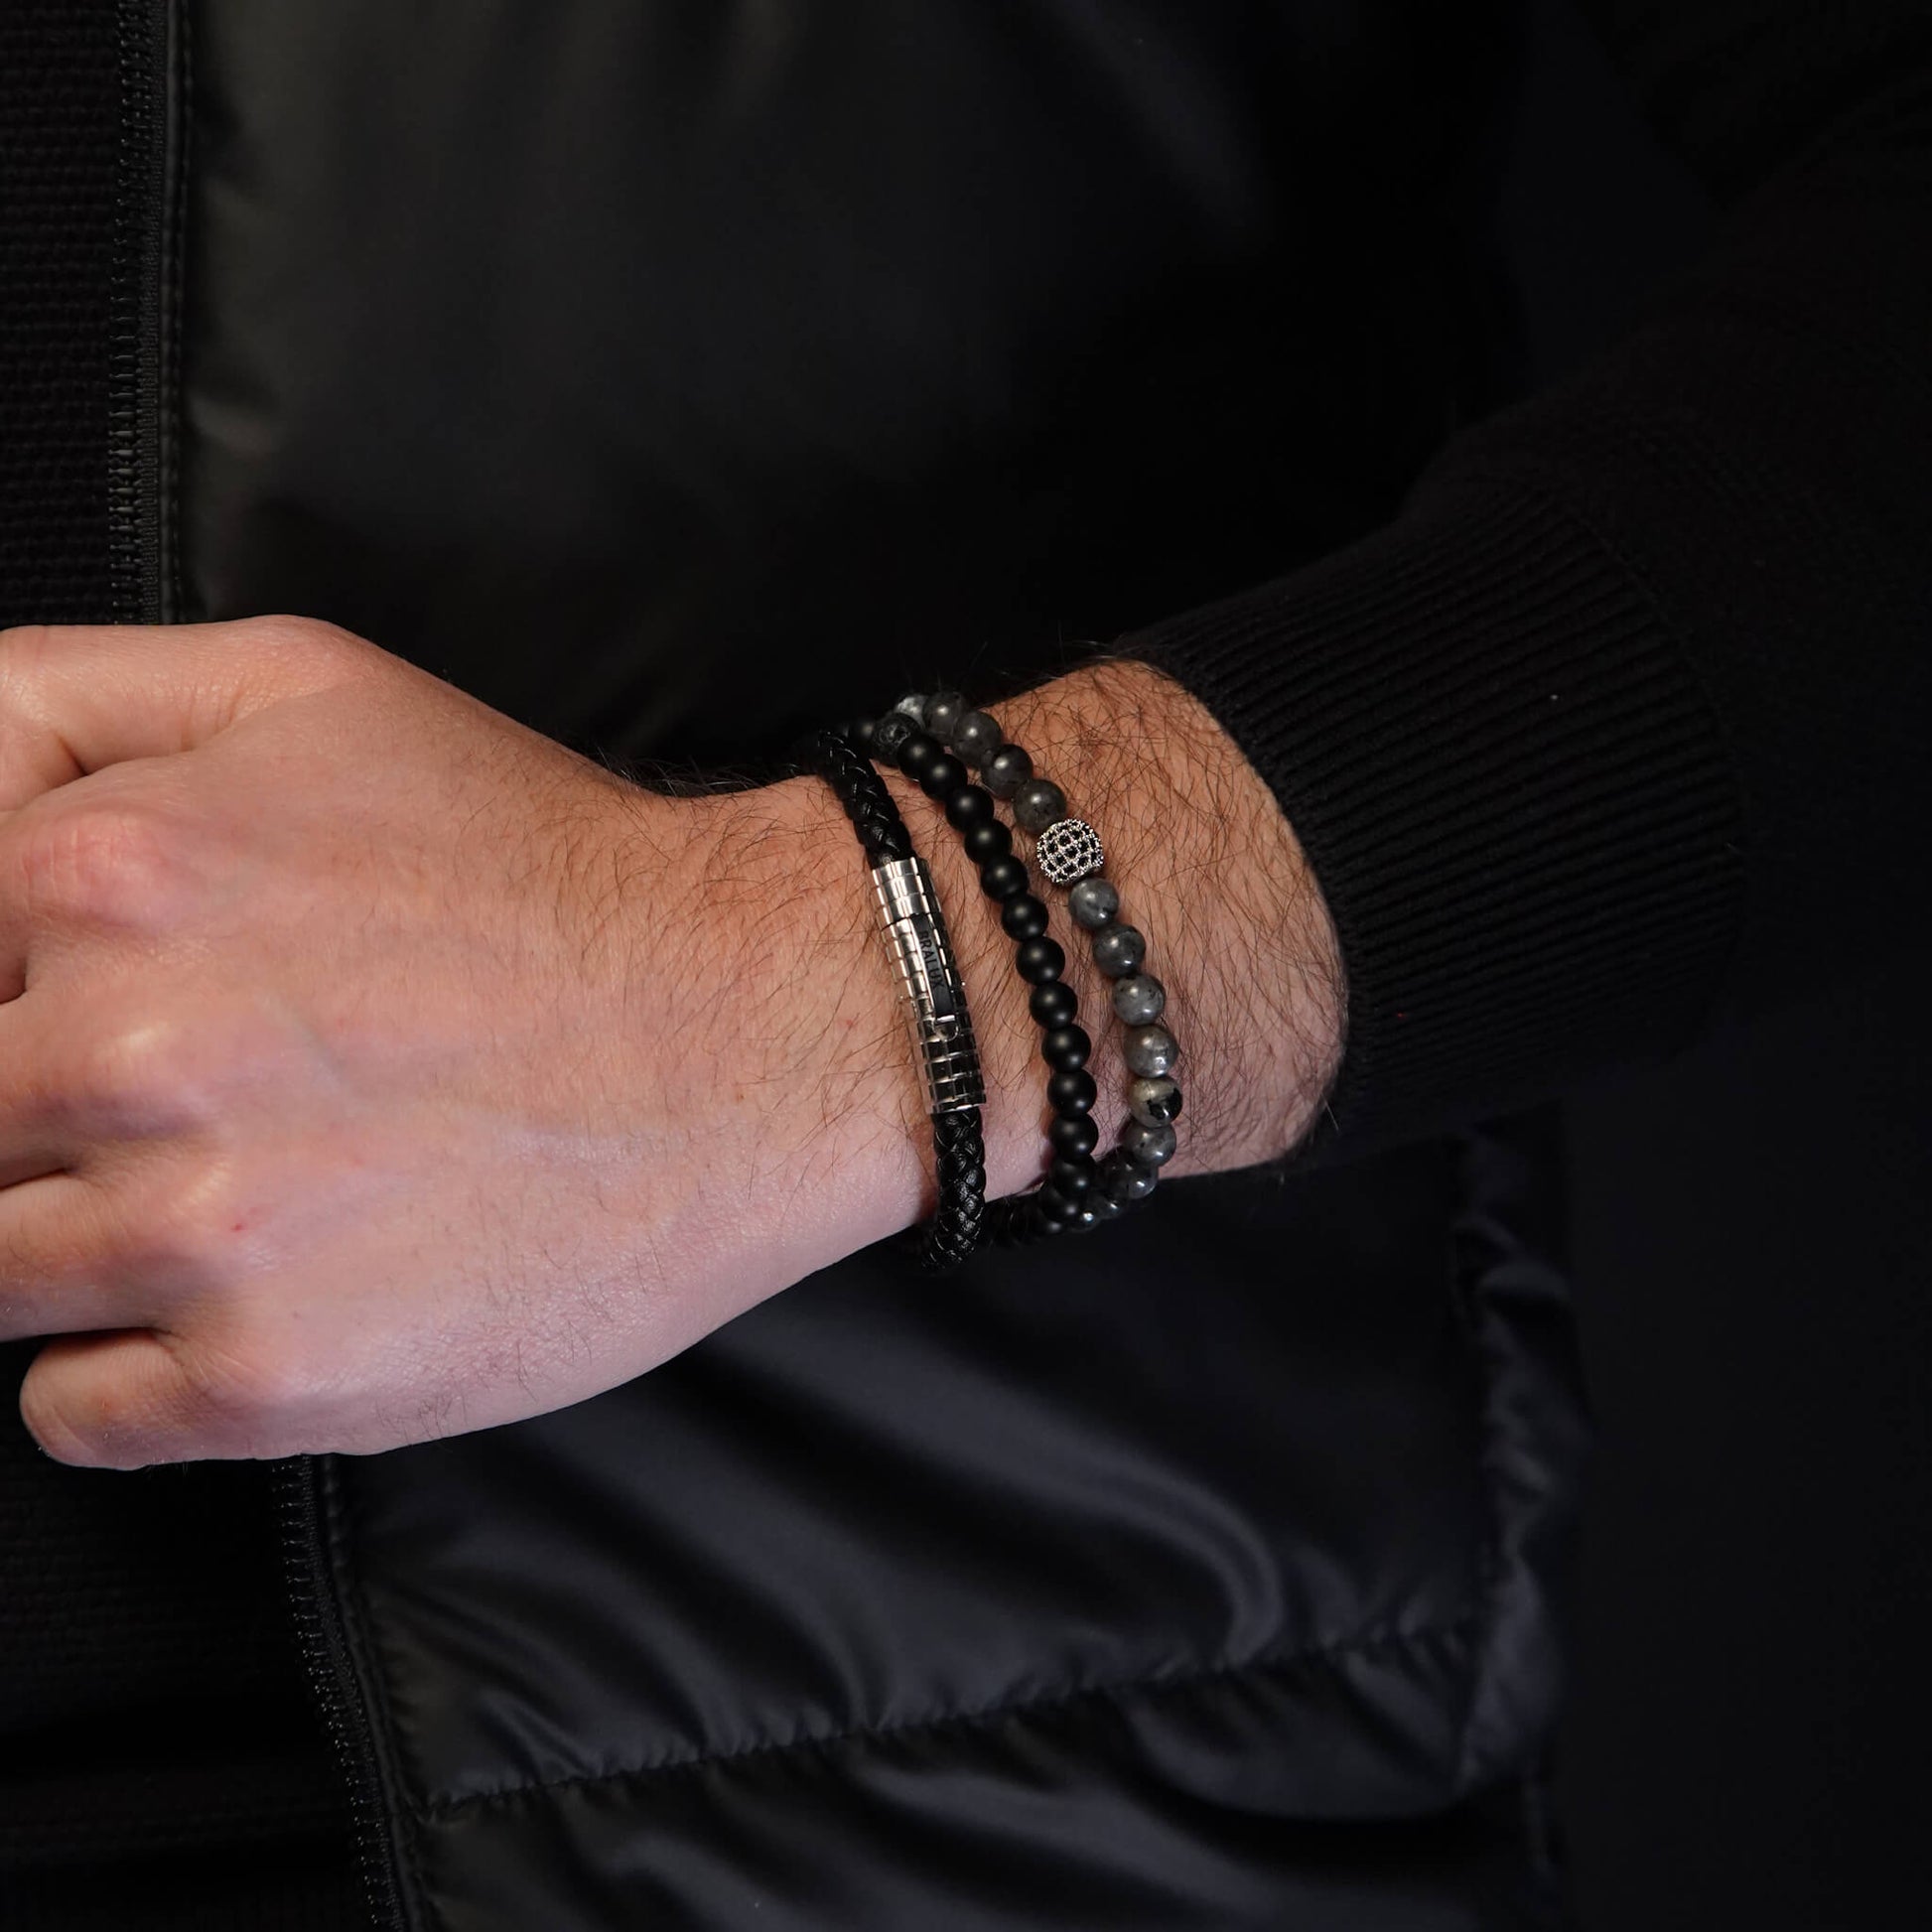 The Silver Plated Duo Black Leather Stack, Bralux